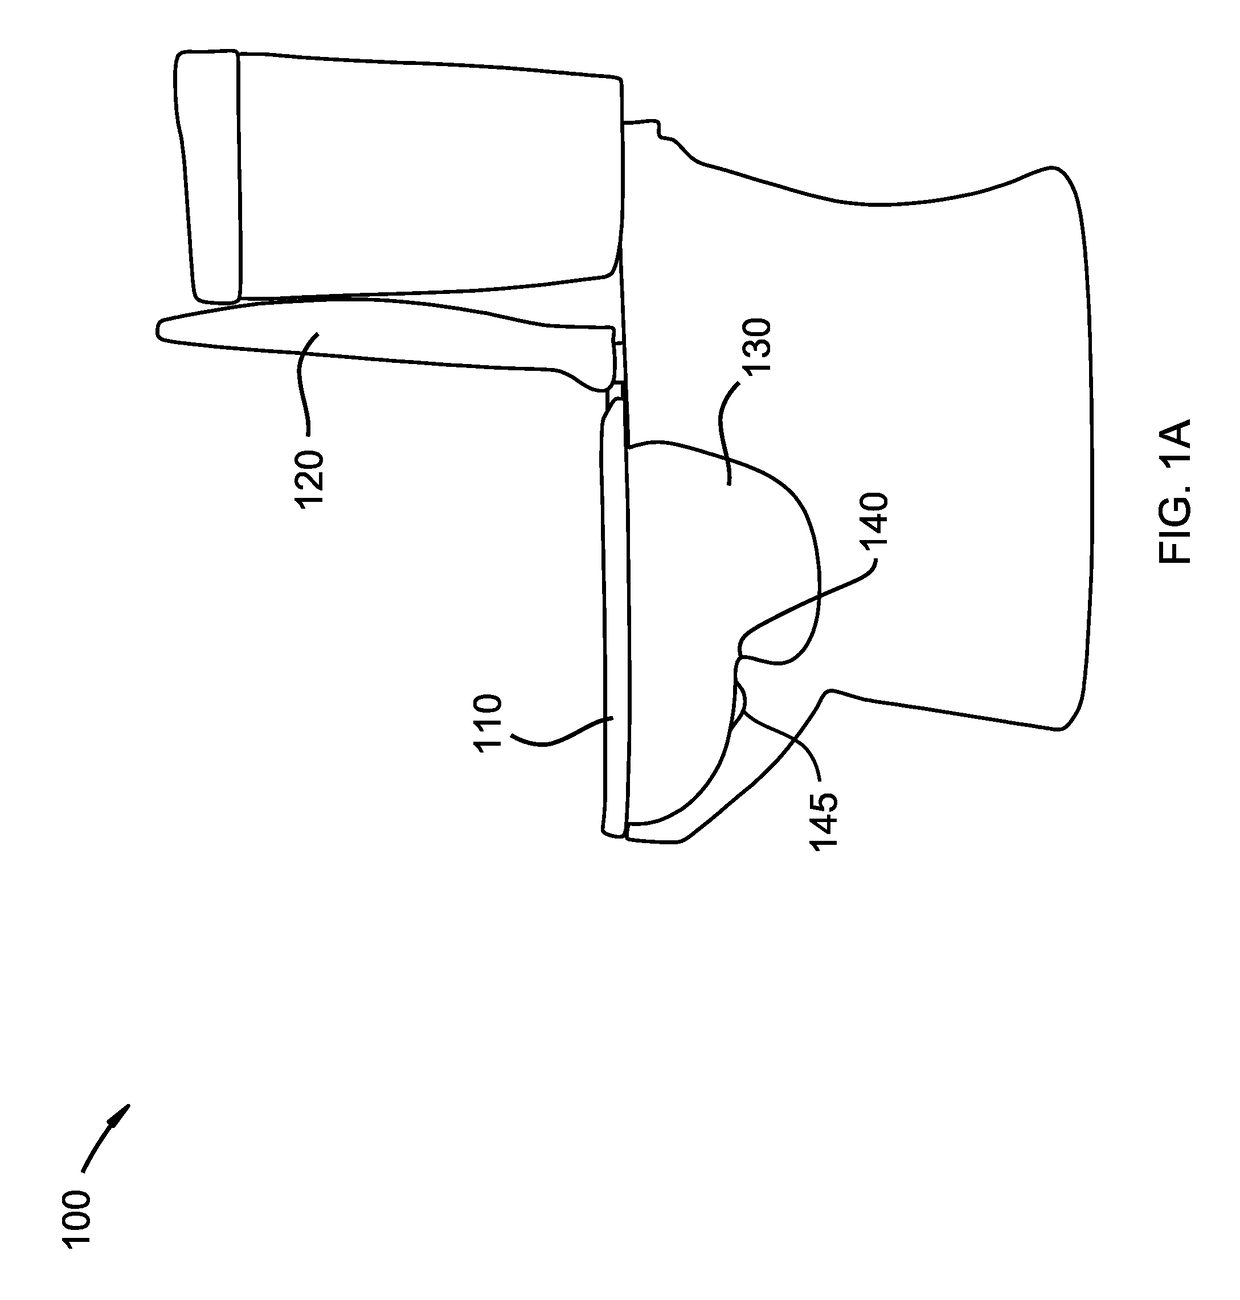 Toilet that detects drug markers and methods of use thereof